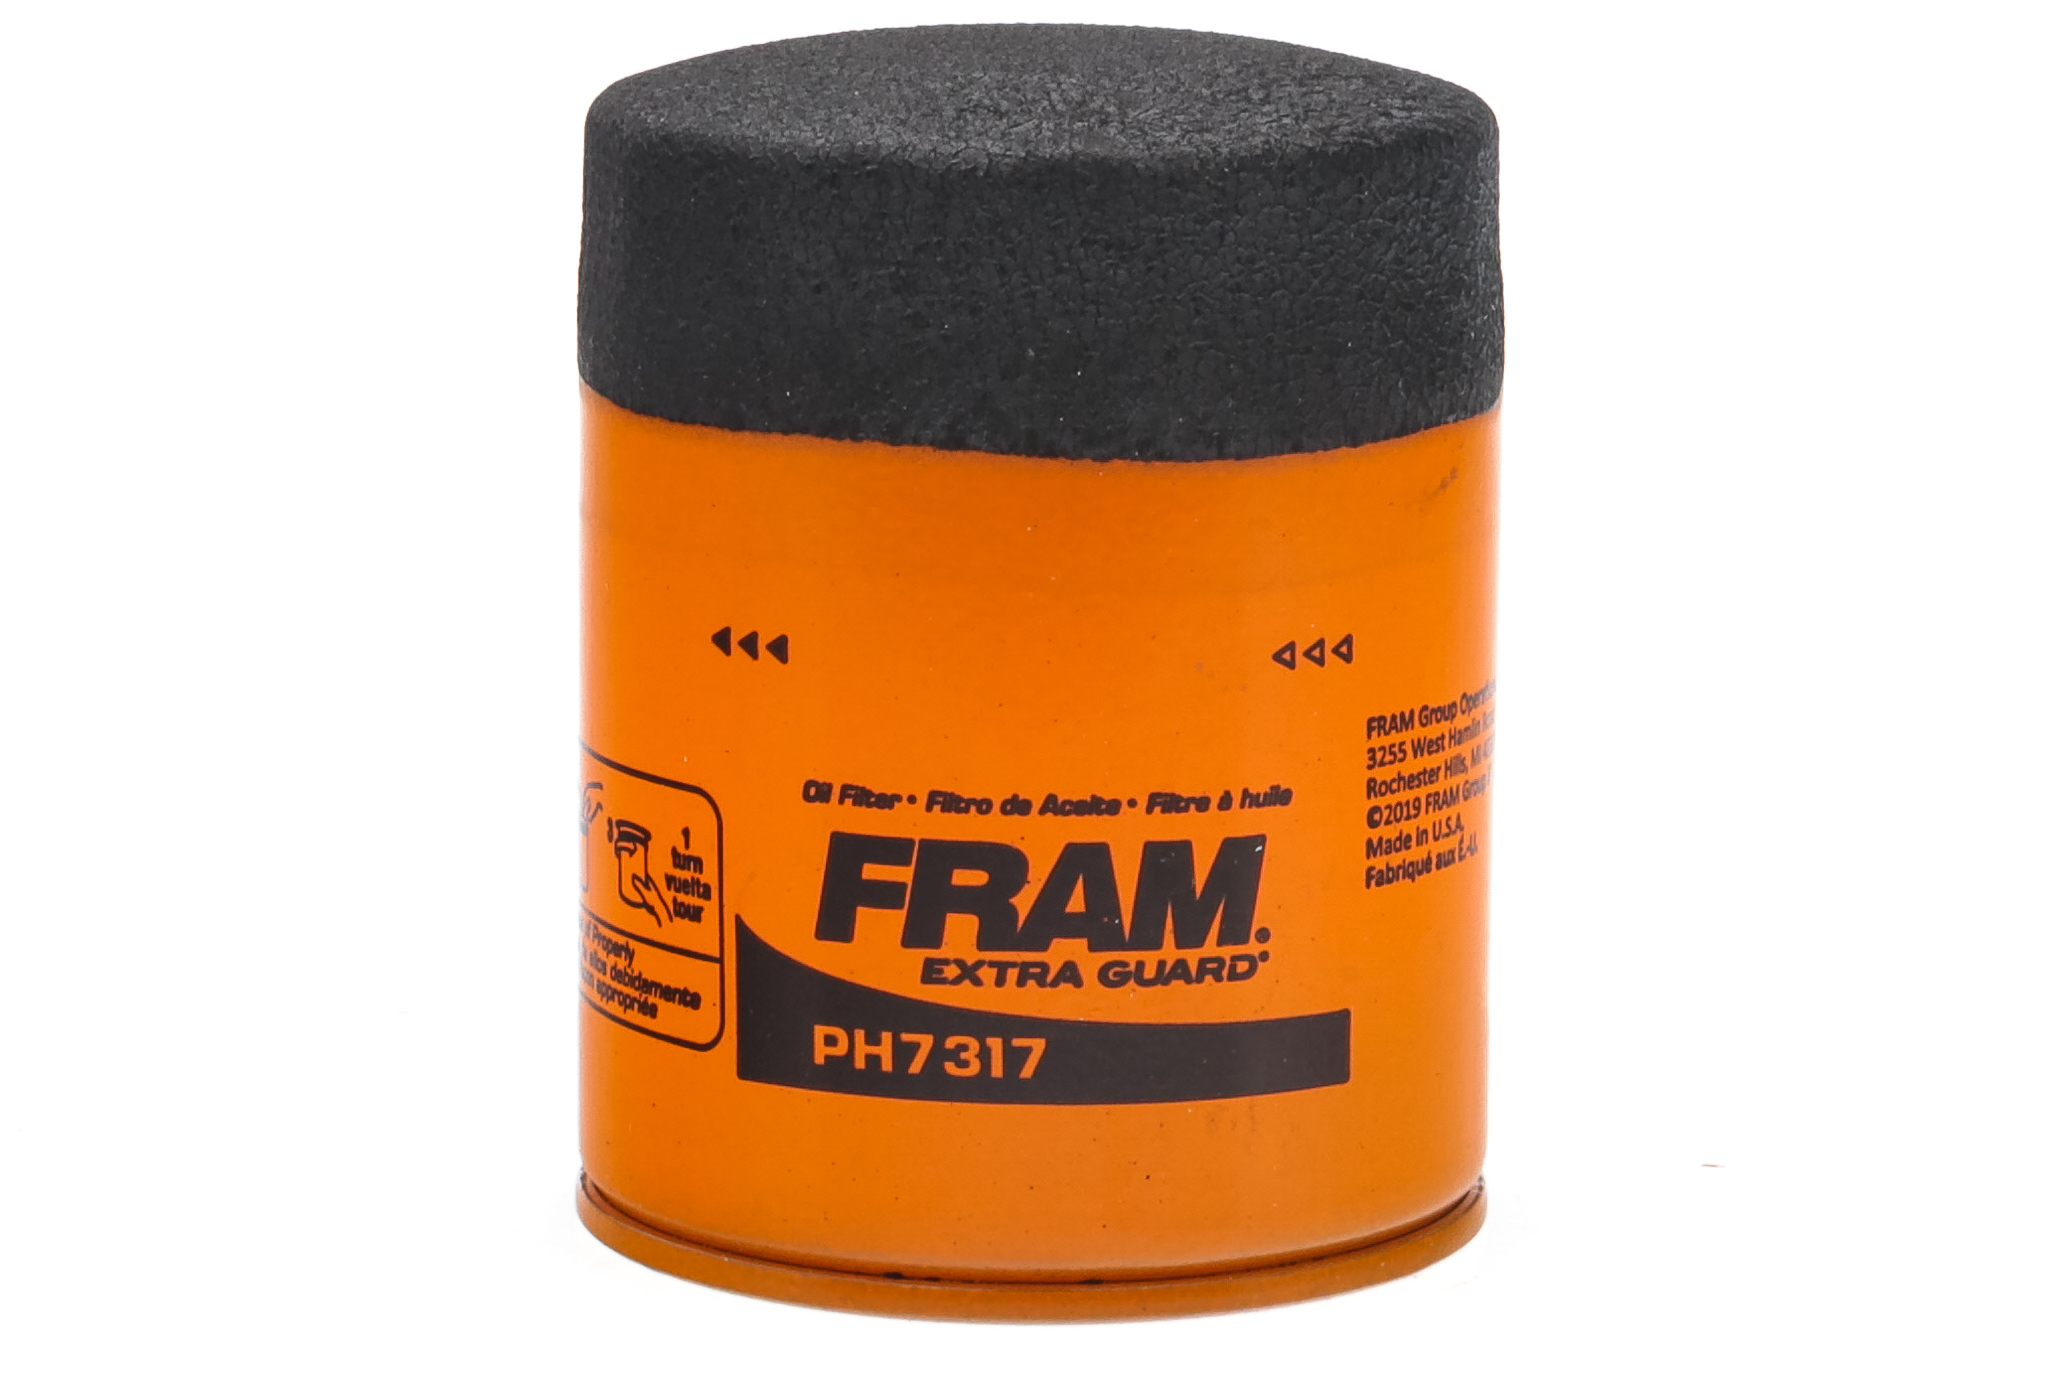 FRAM Extra Guard Oil Filter, PH7317, 10K mile Replacement Oil Filter - image 4 of 10